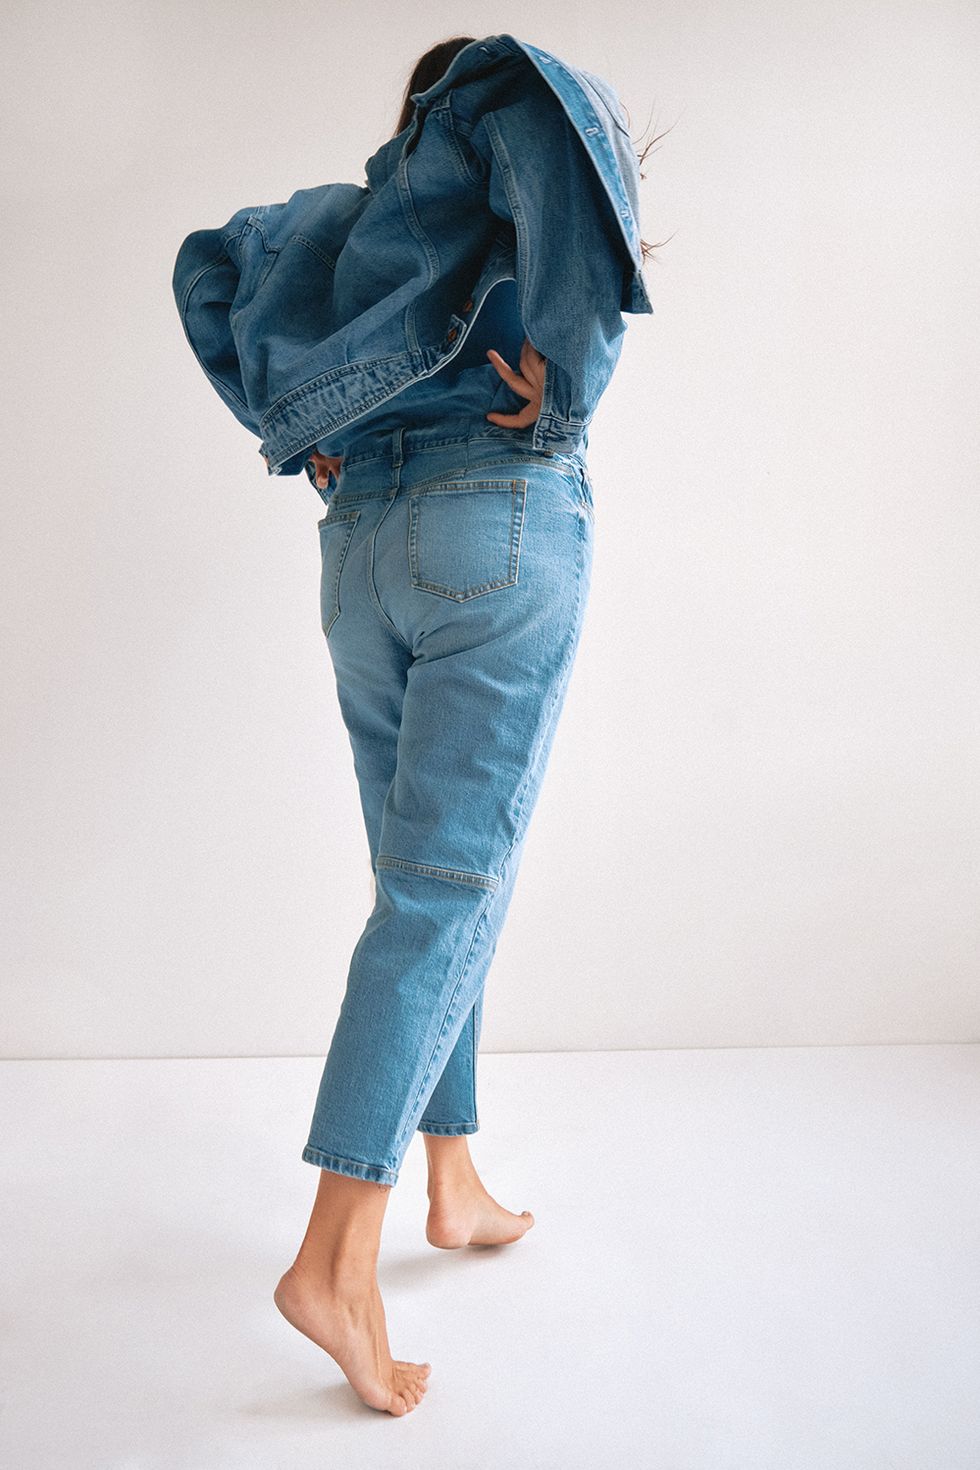 Henning Launches Denim with a Single Plus-Size Pair of Jeans